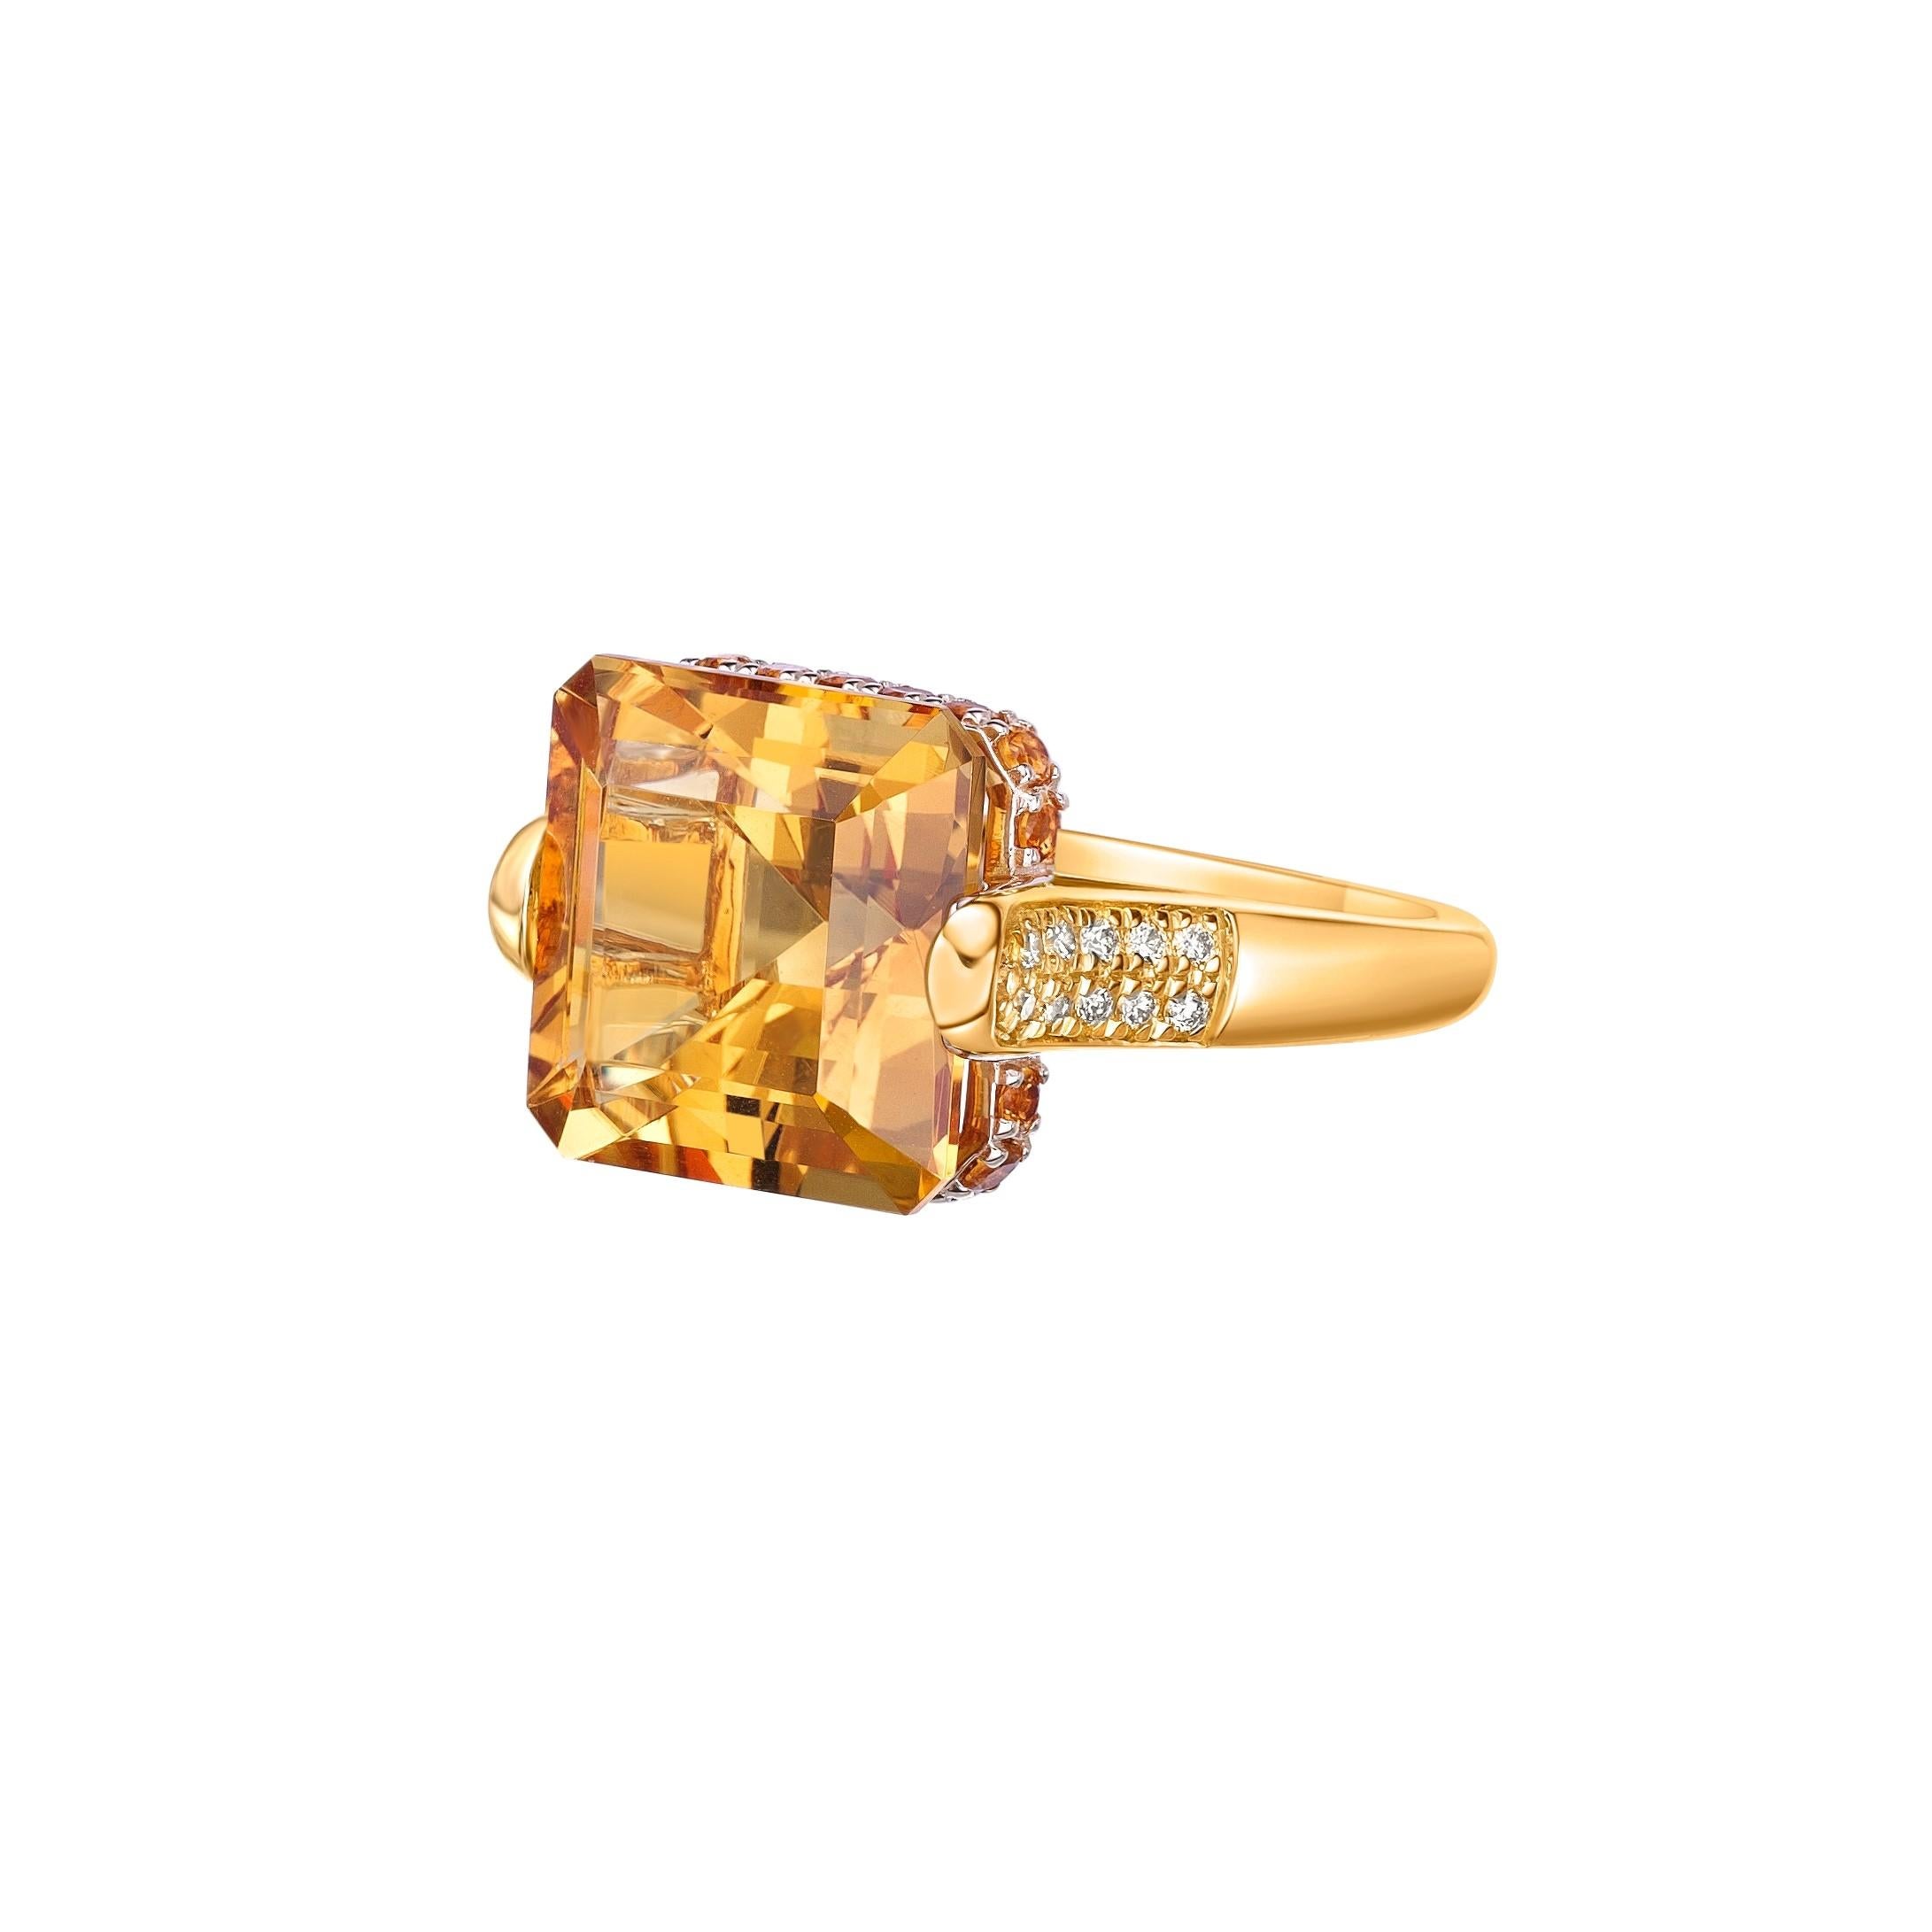 Octagon Cut 7.79Carat Citrine Fancy Ring in 18Karat Yellow Gold with White Diamond. For Sale